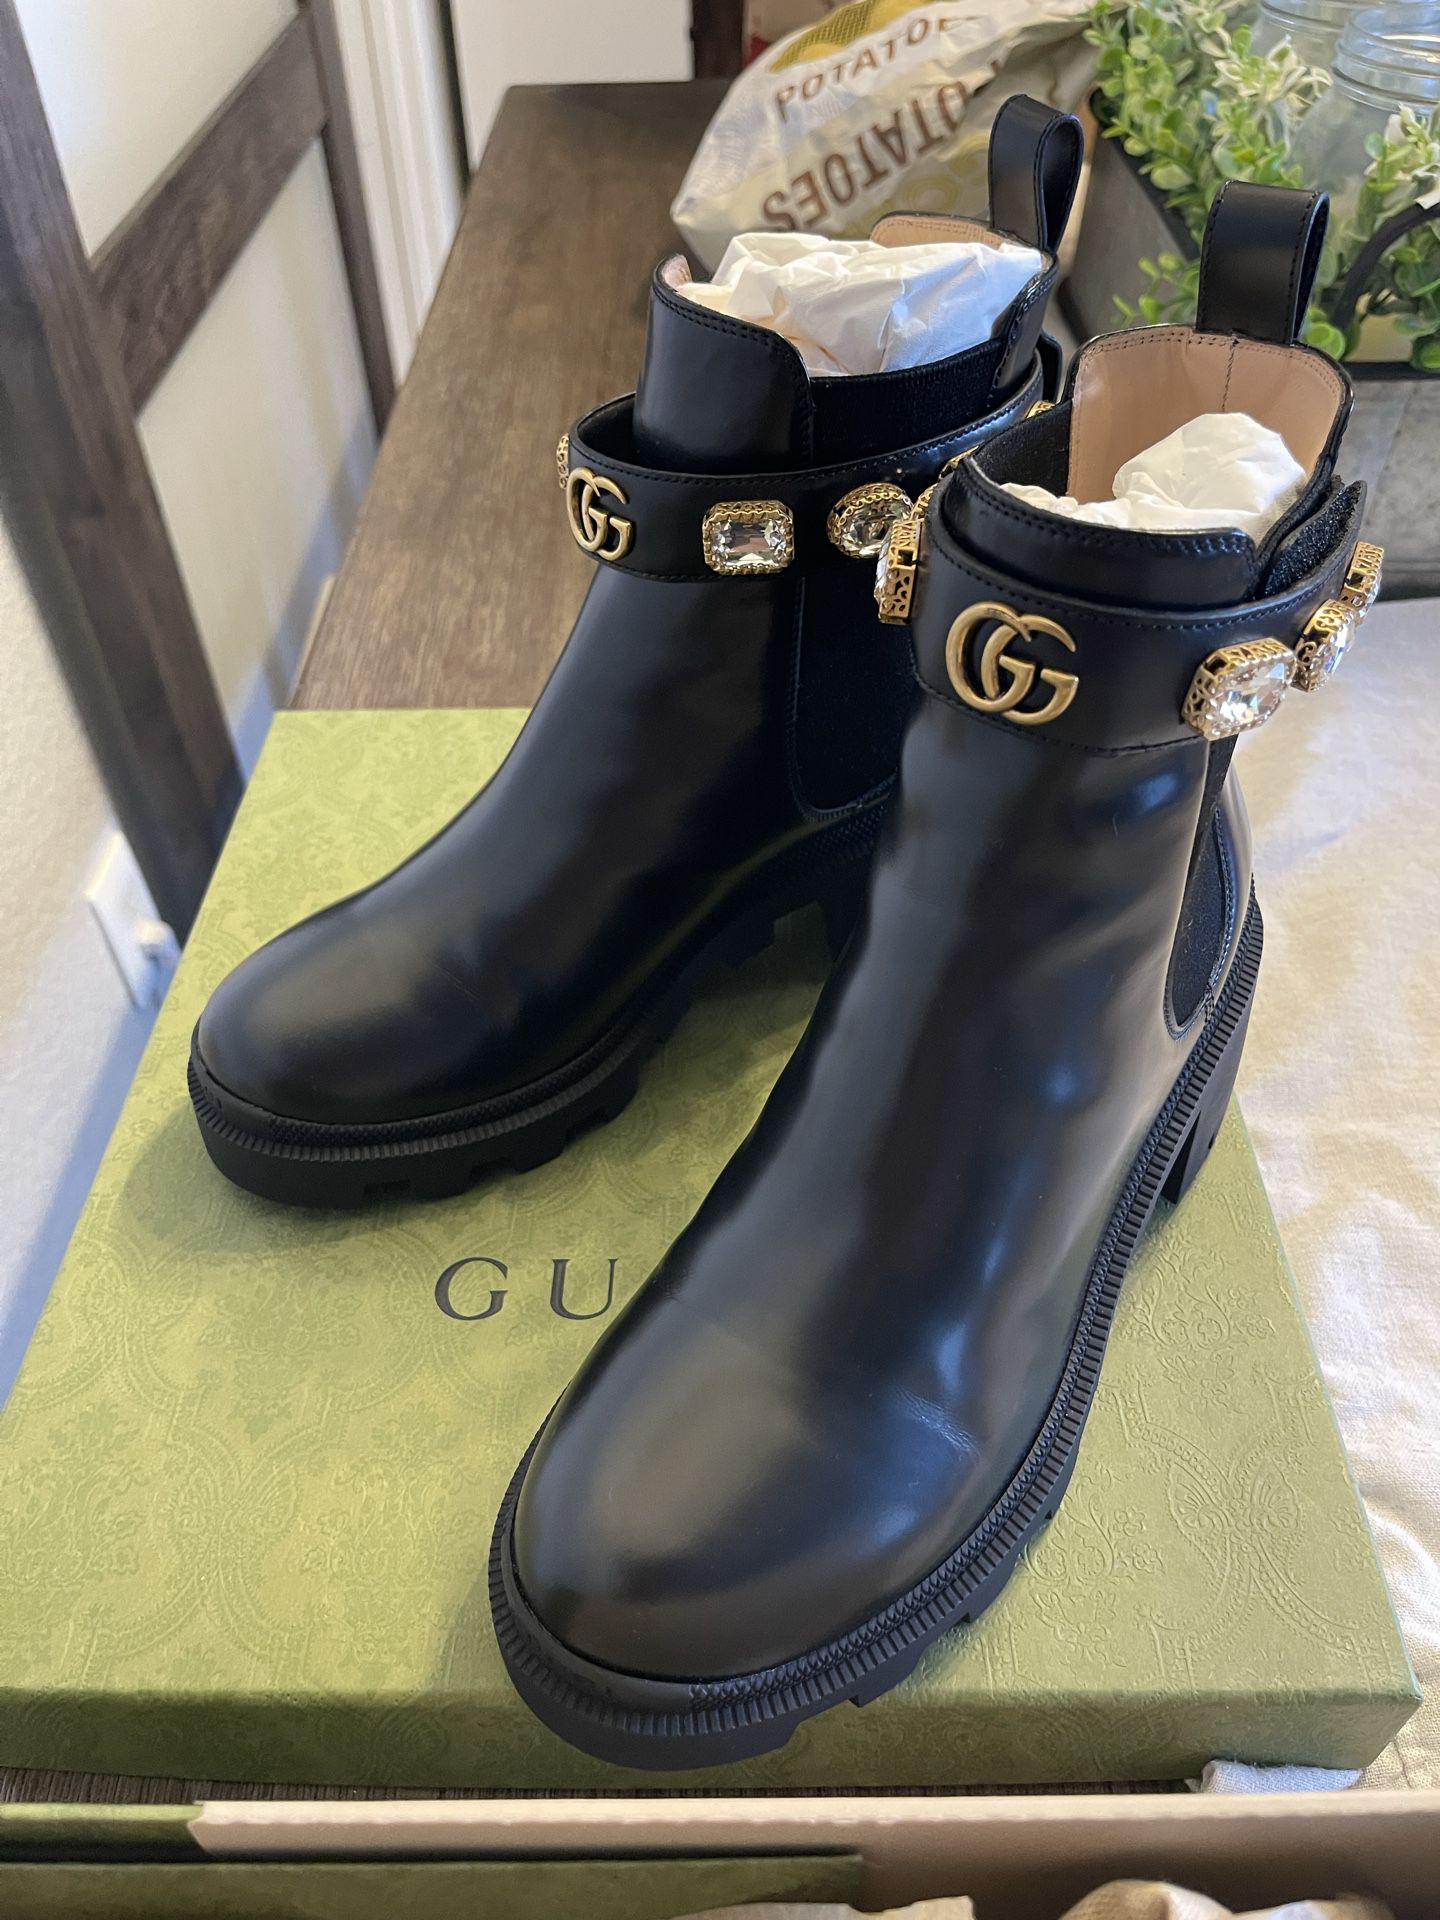 GUCCI Women’s Boots $800 Size 8